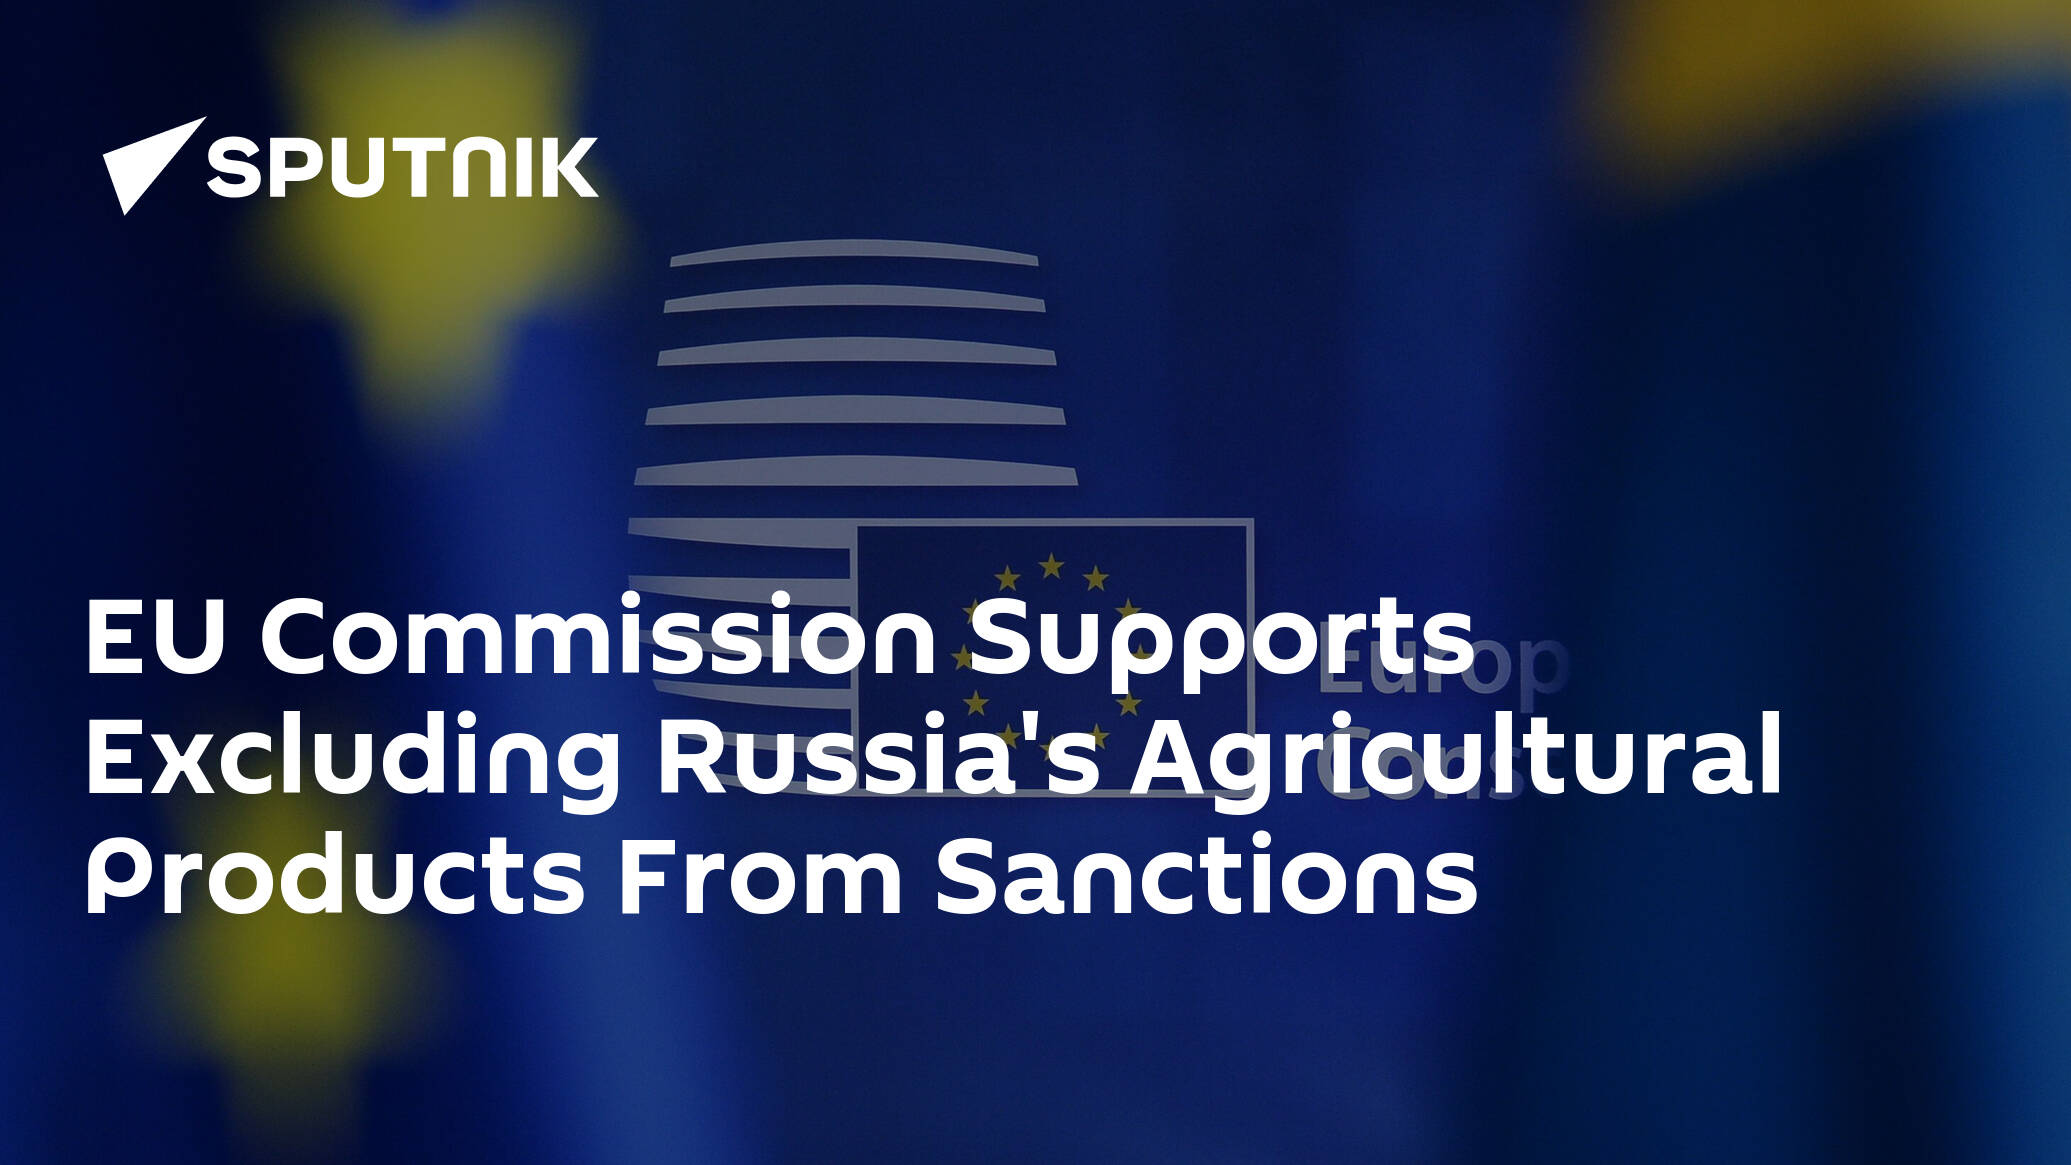 EU Commission Supports Excluding Russia's Agricultural Products From Sanctions